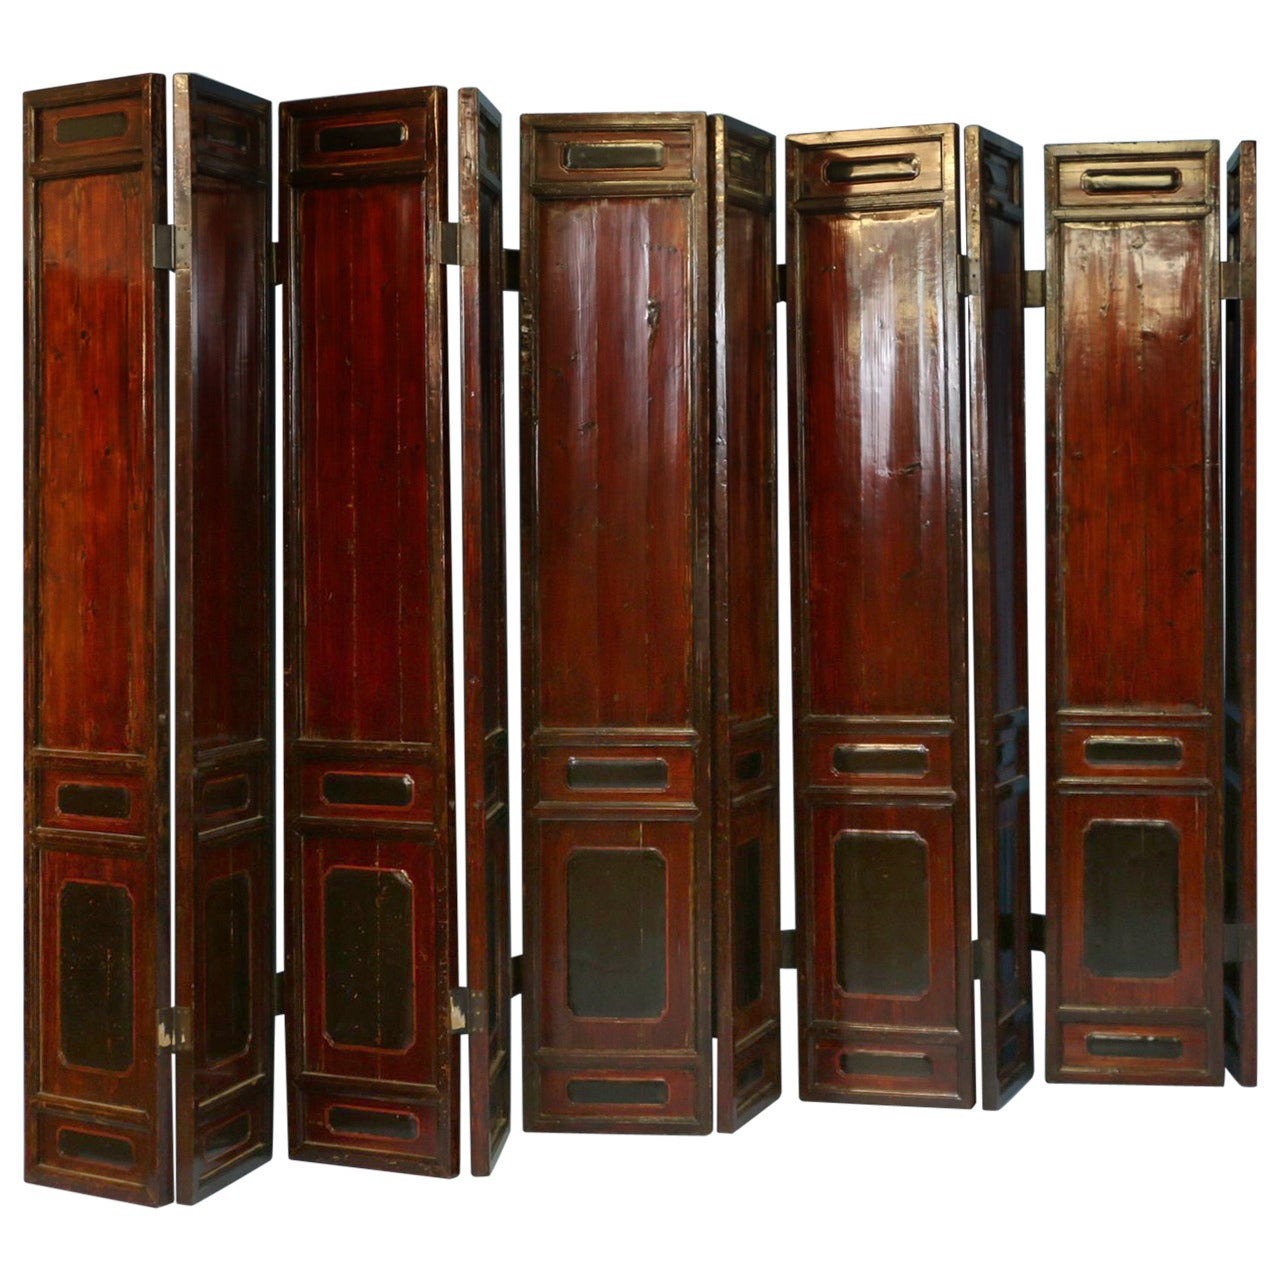 Striking Set of Antique Chinese Lacquered Ten-Panel Screens, circa 1800-1820